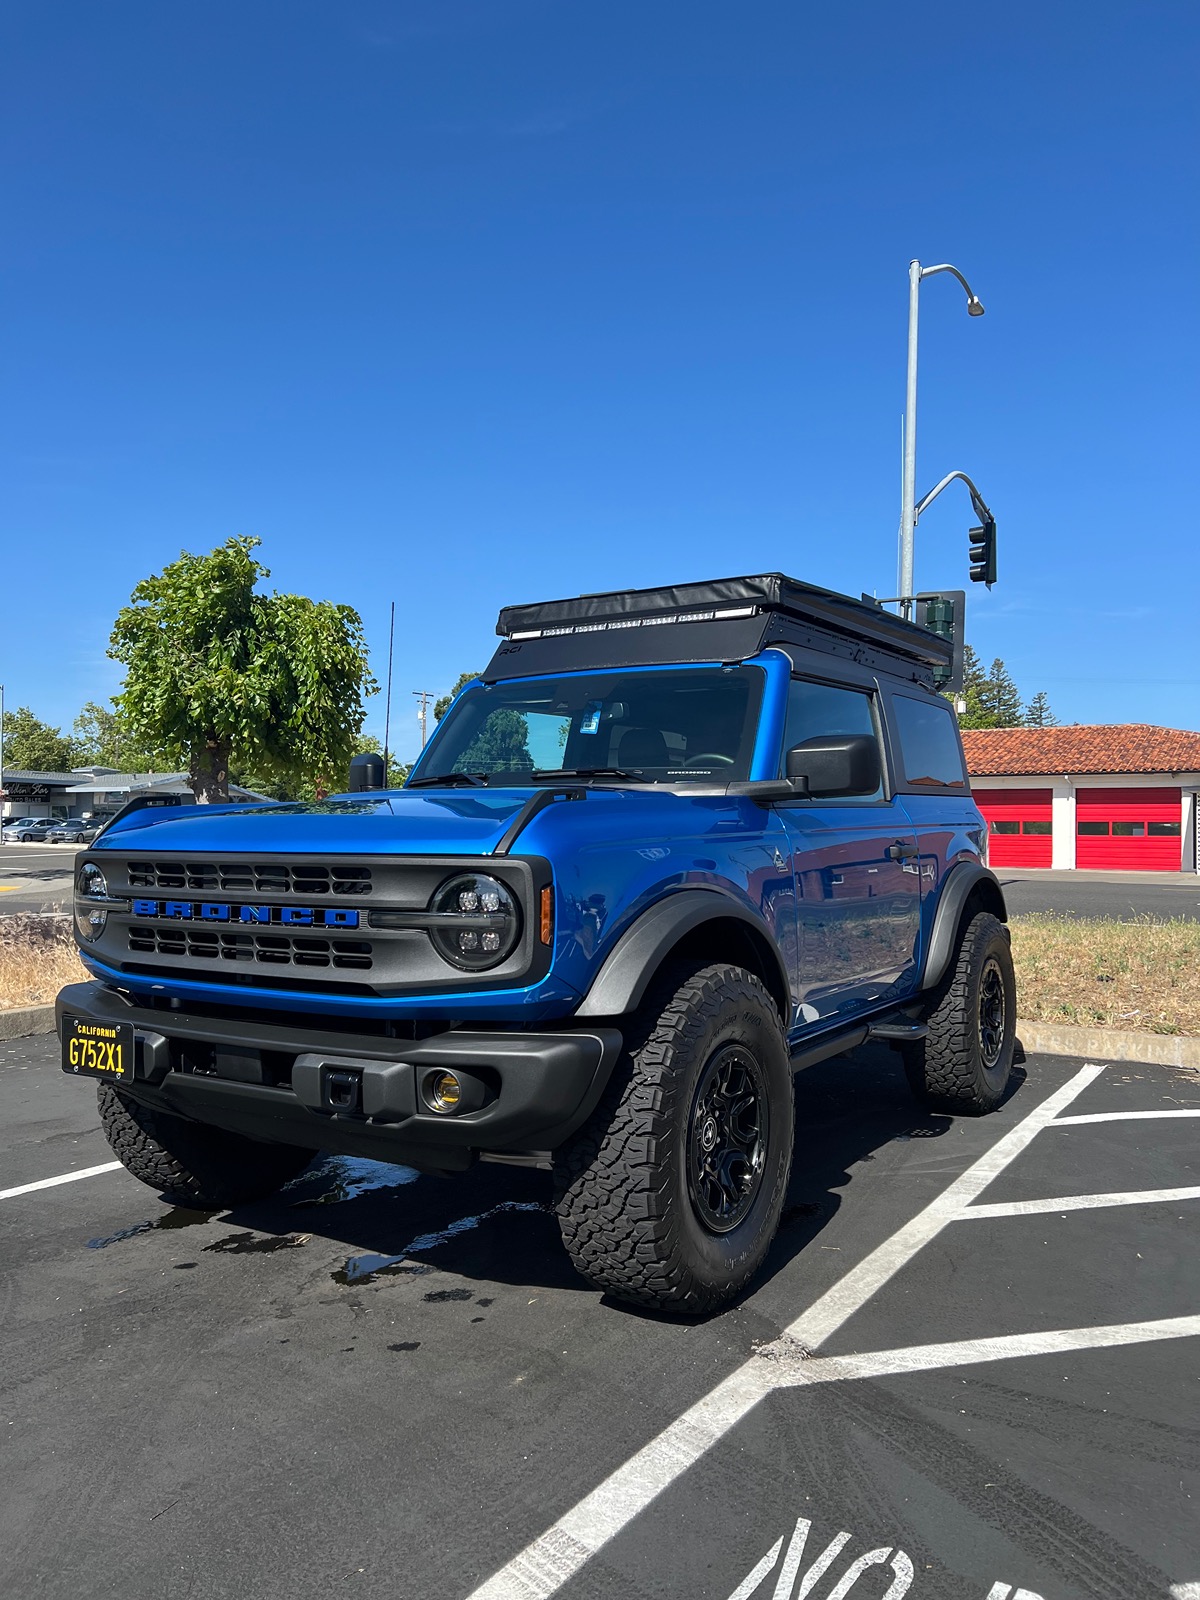 Ford Bronco Disappointing RCI roof rack… IMG_4336